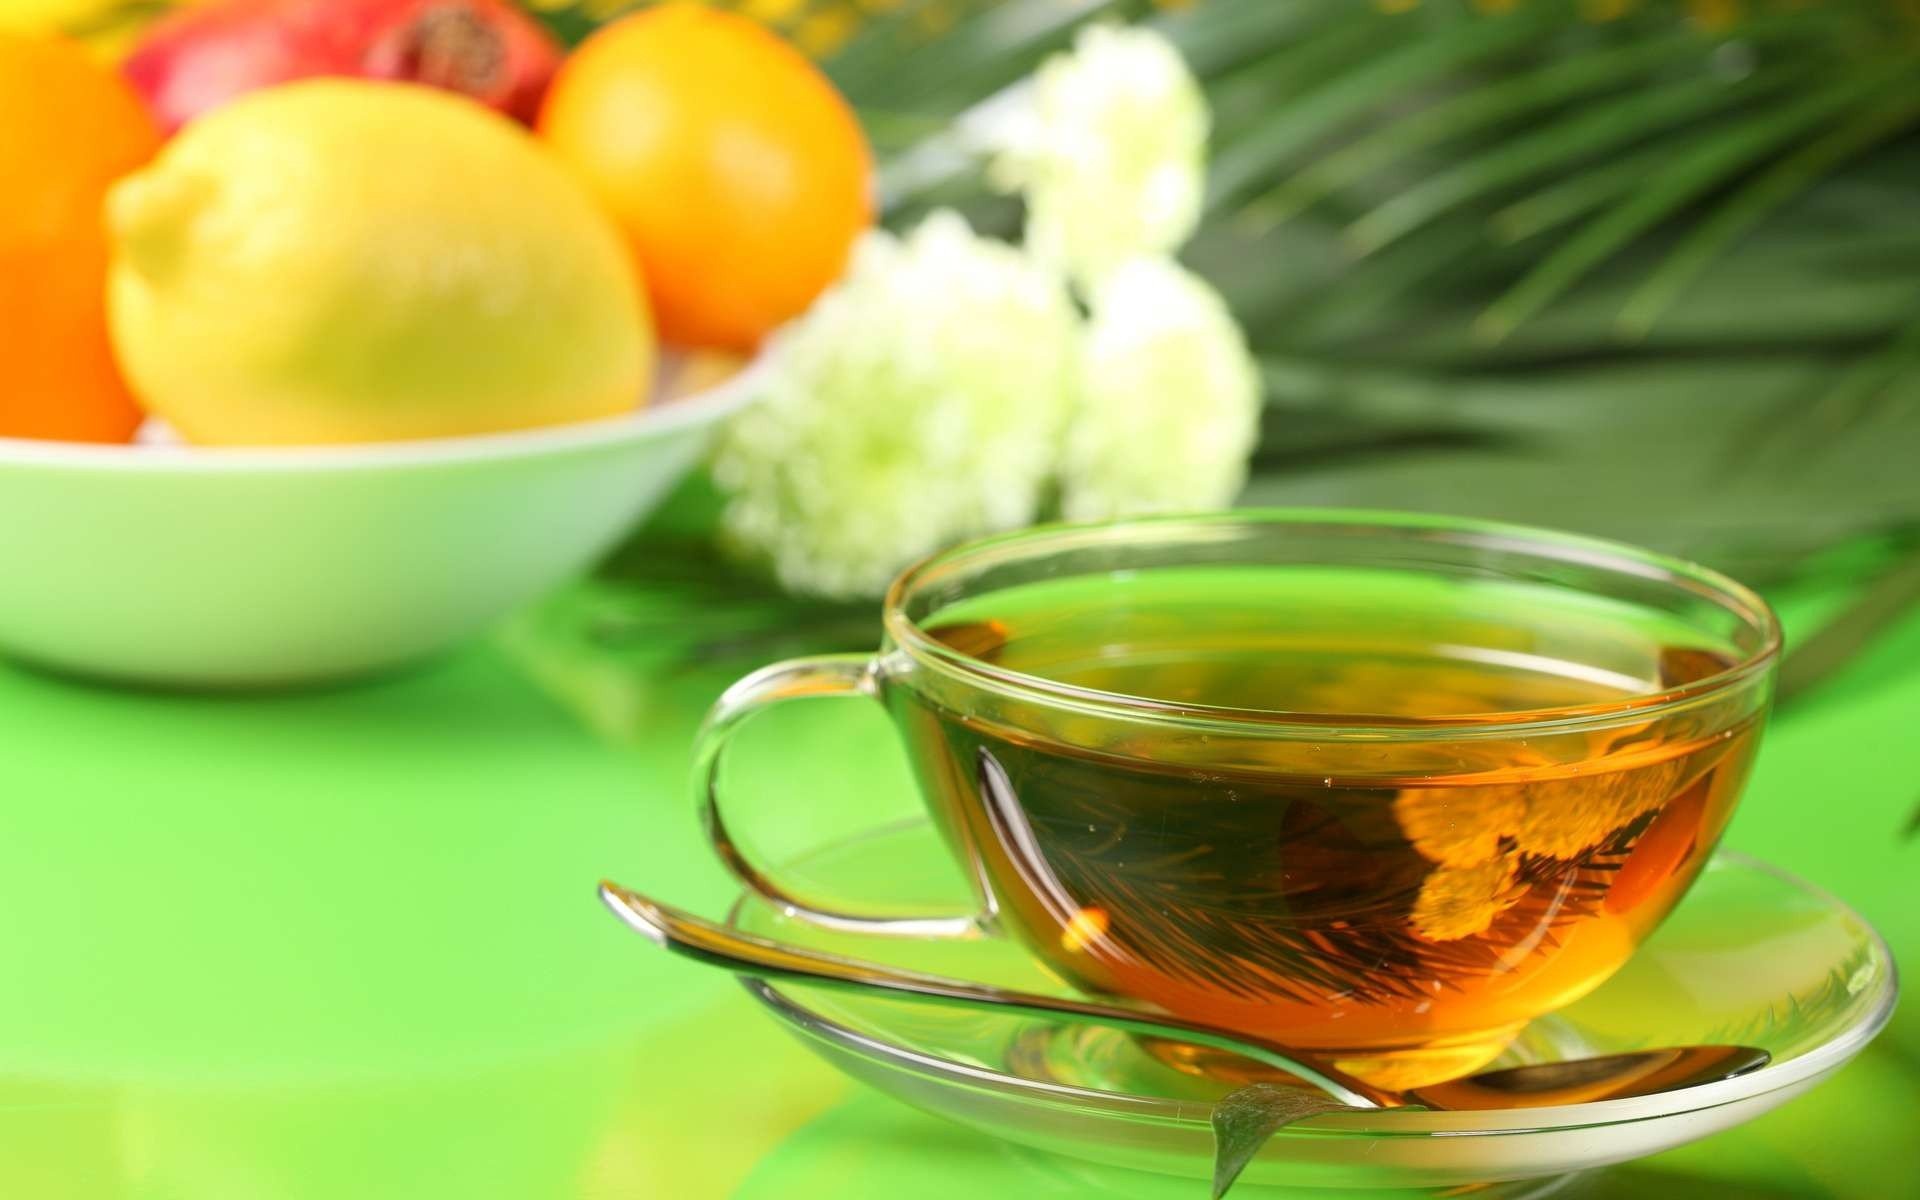 Tea: Tisane, Herbal teas, also known as herbal infusions. 1920x1200 HD Wallpaper.